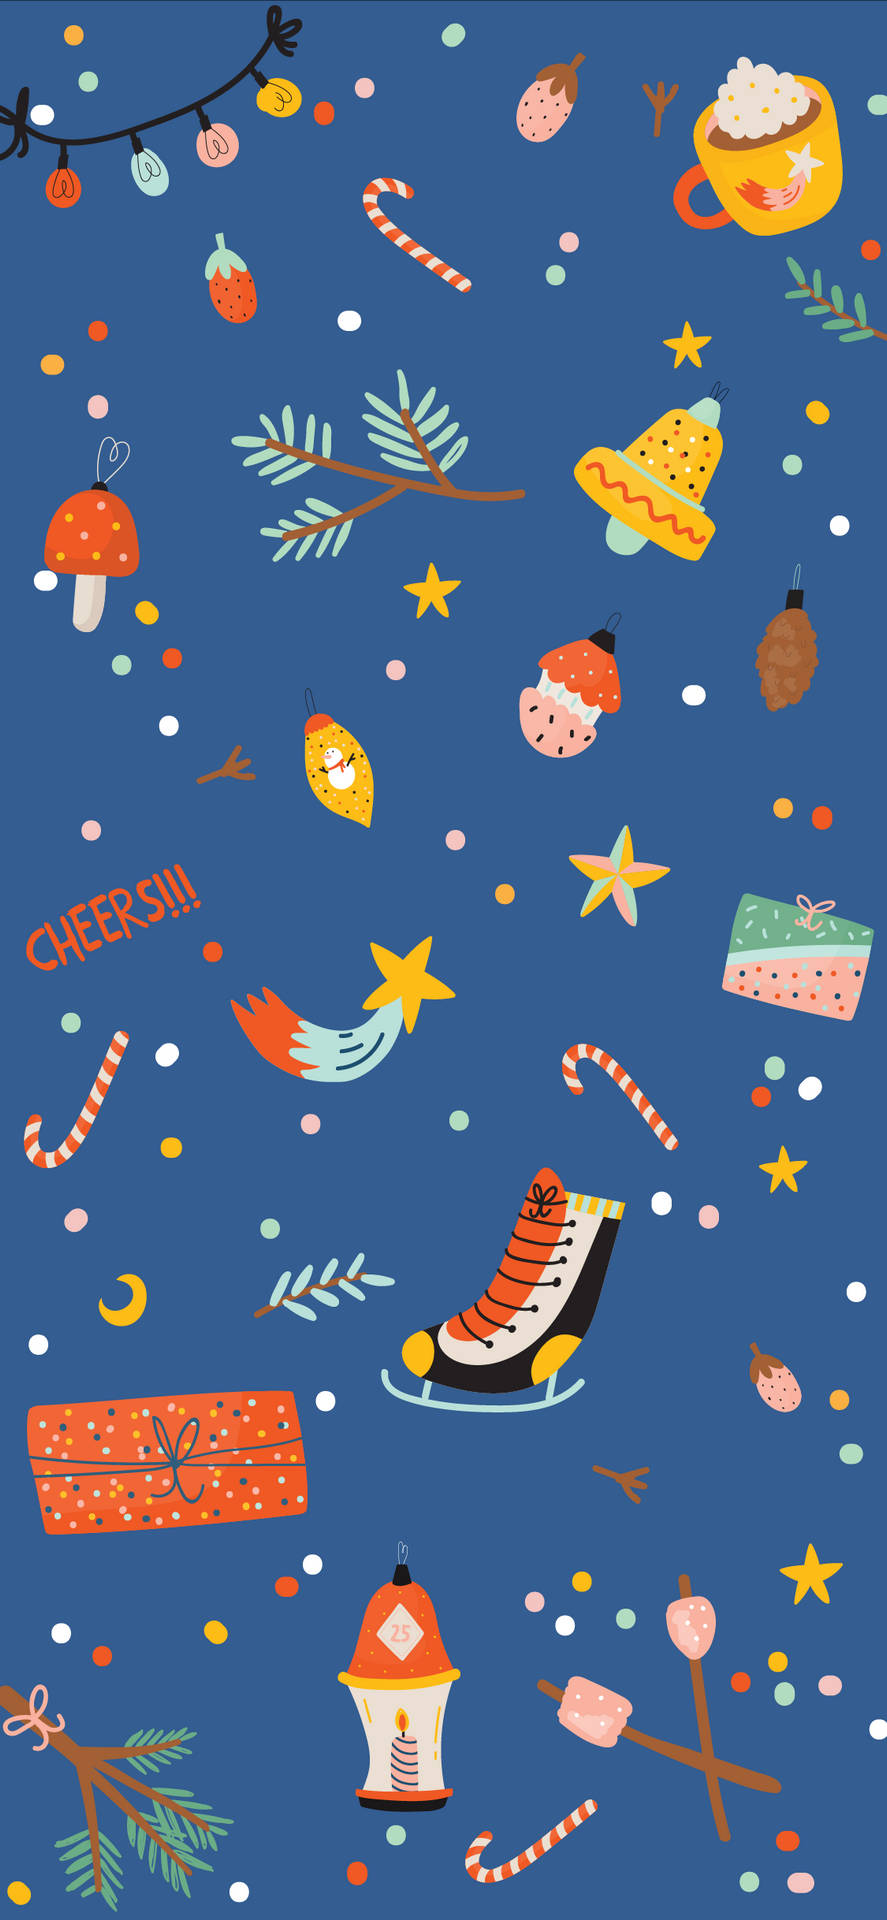 Bundle Up in Style This Winter With Cute Winter Iphone Wallpaper